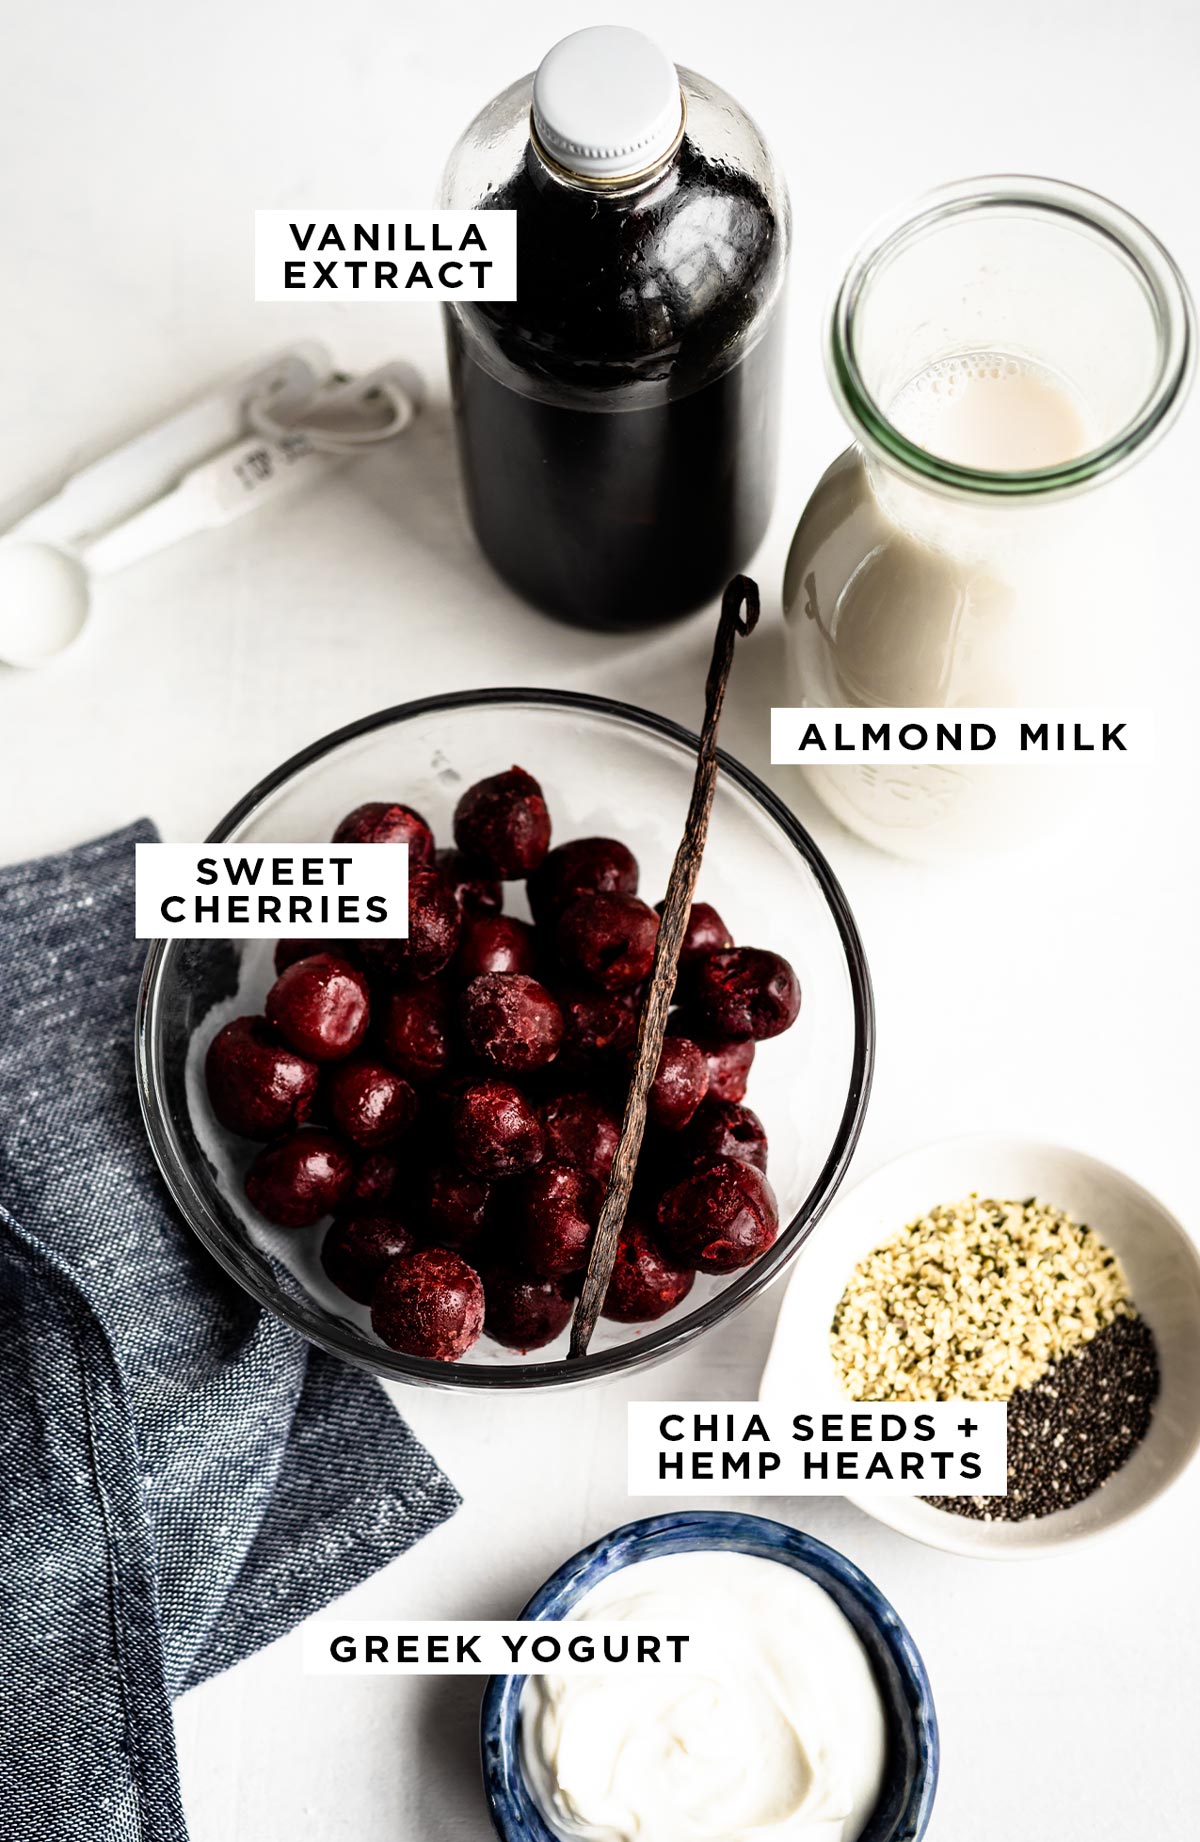 labeled ingredients for a diabetes smoothie including vanilla extract, almond milk, sweet cherries, chia seeds & hemp hearts and greek yogurt.